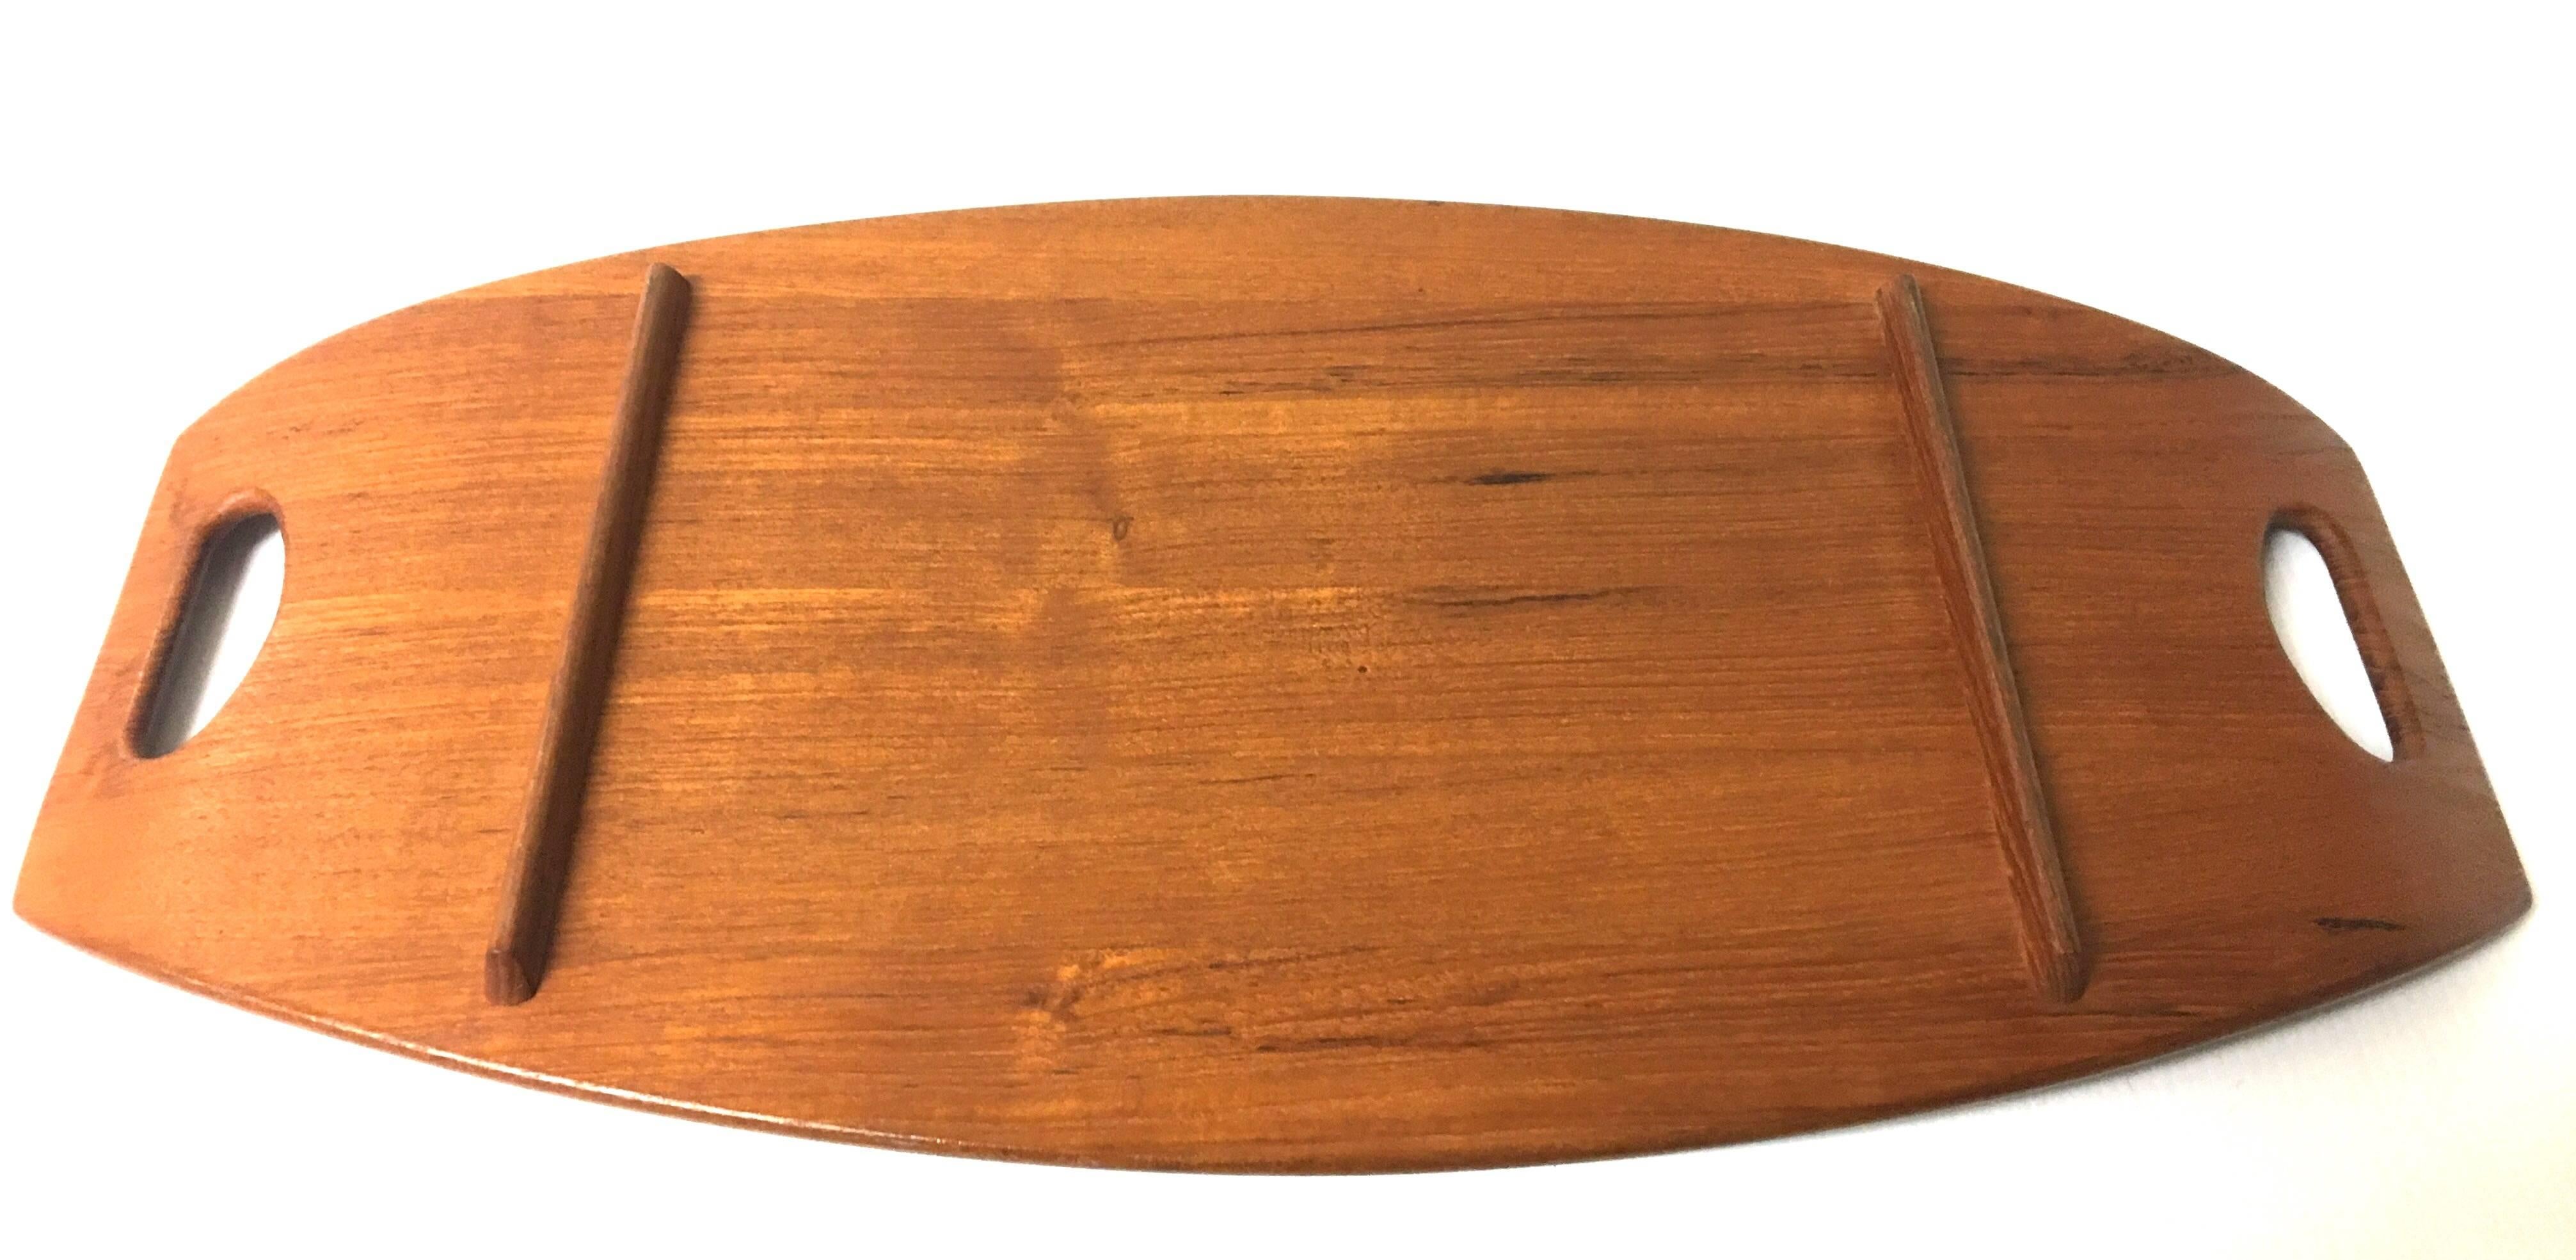 Beautiful solid teak gondola tray designed by Jens Quistgaard for Dansk; early production. Nice condition with raised edges and elegant lines. The large tray is 23 1/2